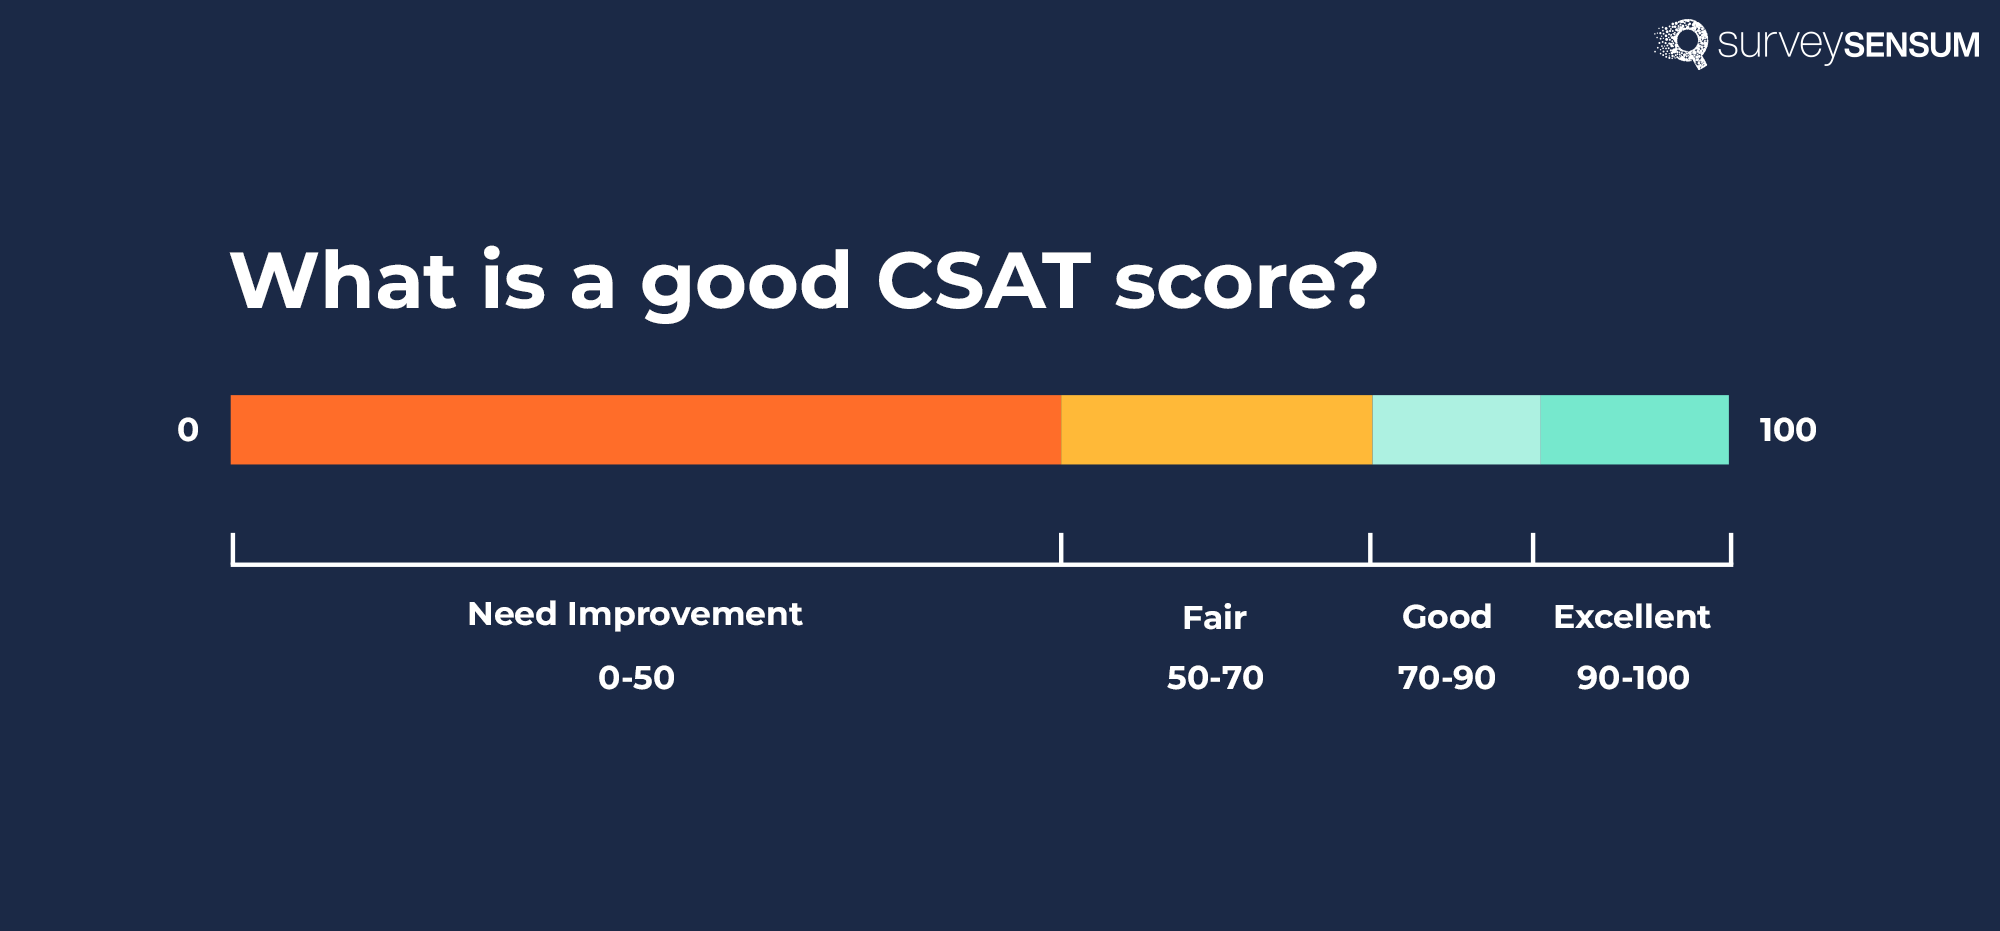  The image shows what is considered a good CSAT score after you have calculated the score of your responses. 